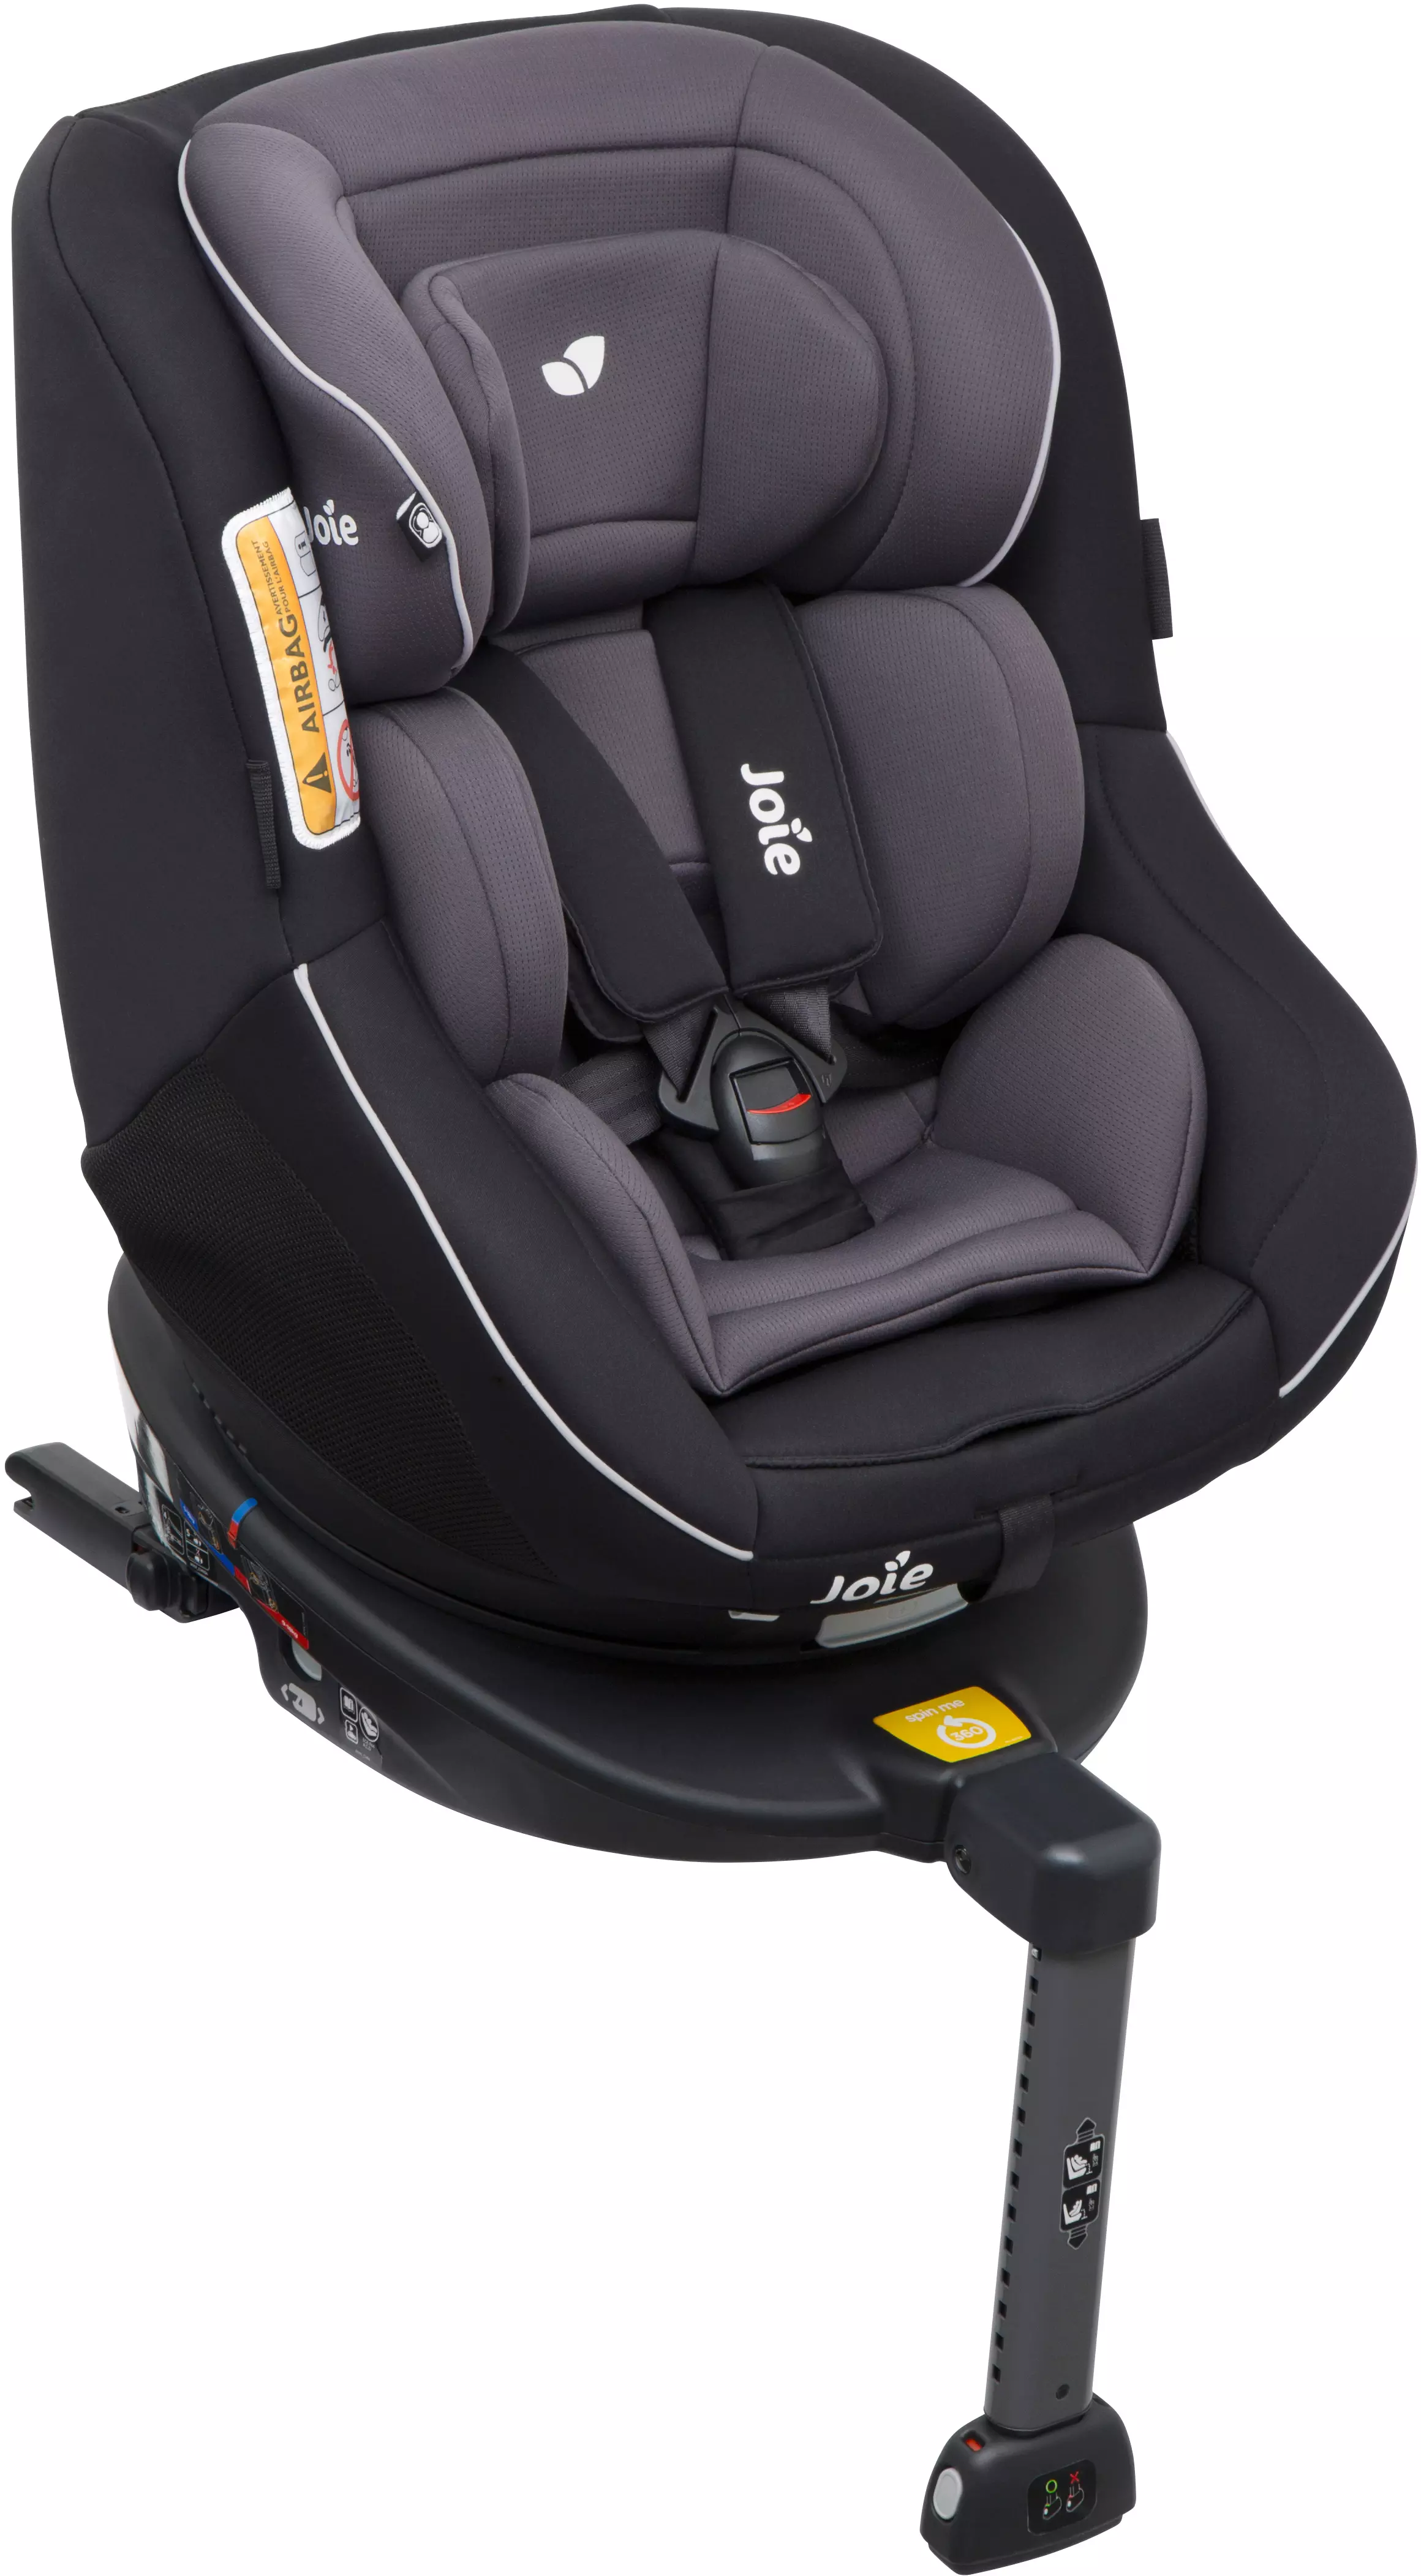 Joie Spin 360 0+1 Child Car Seat - Two 